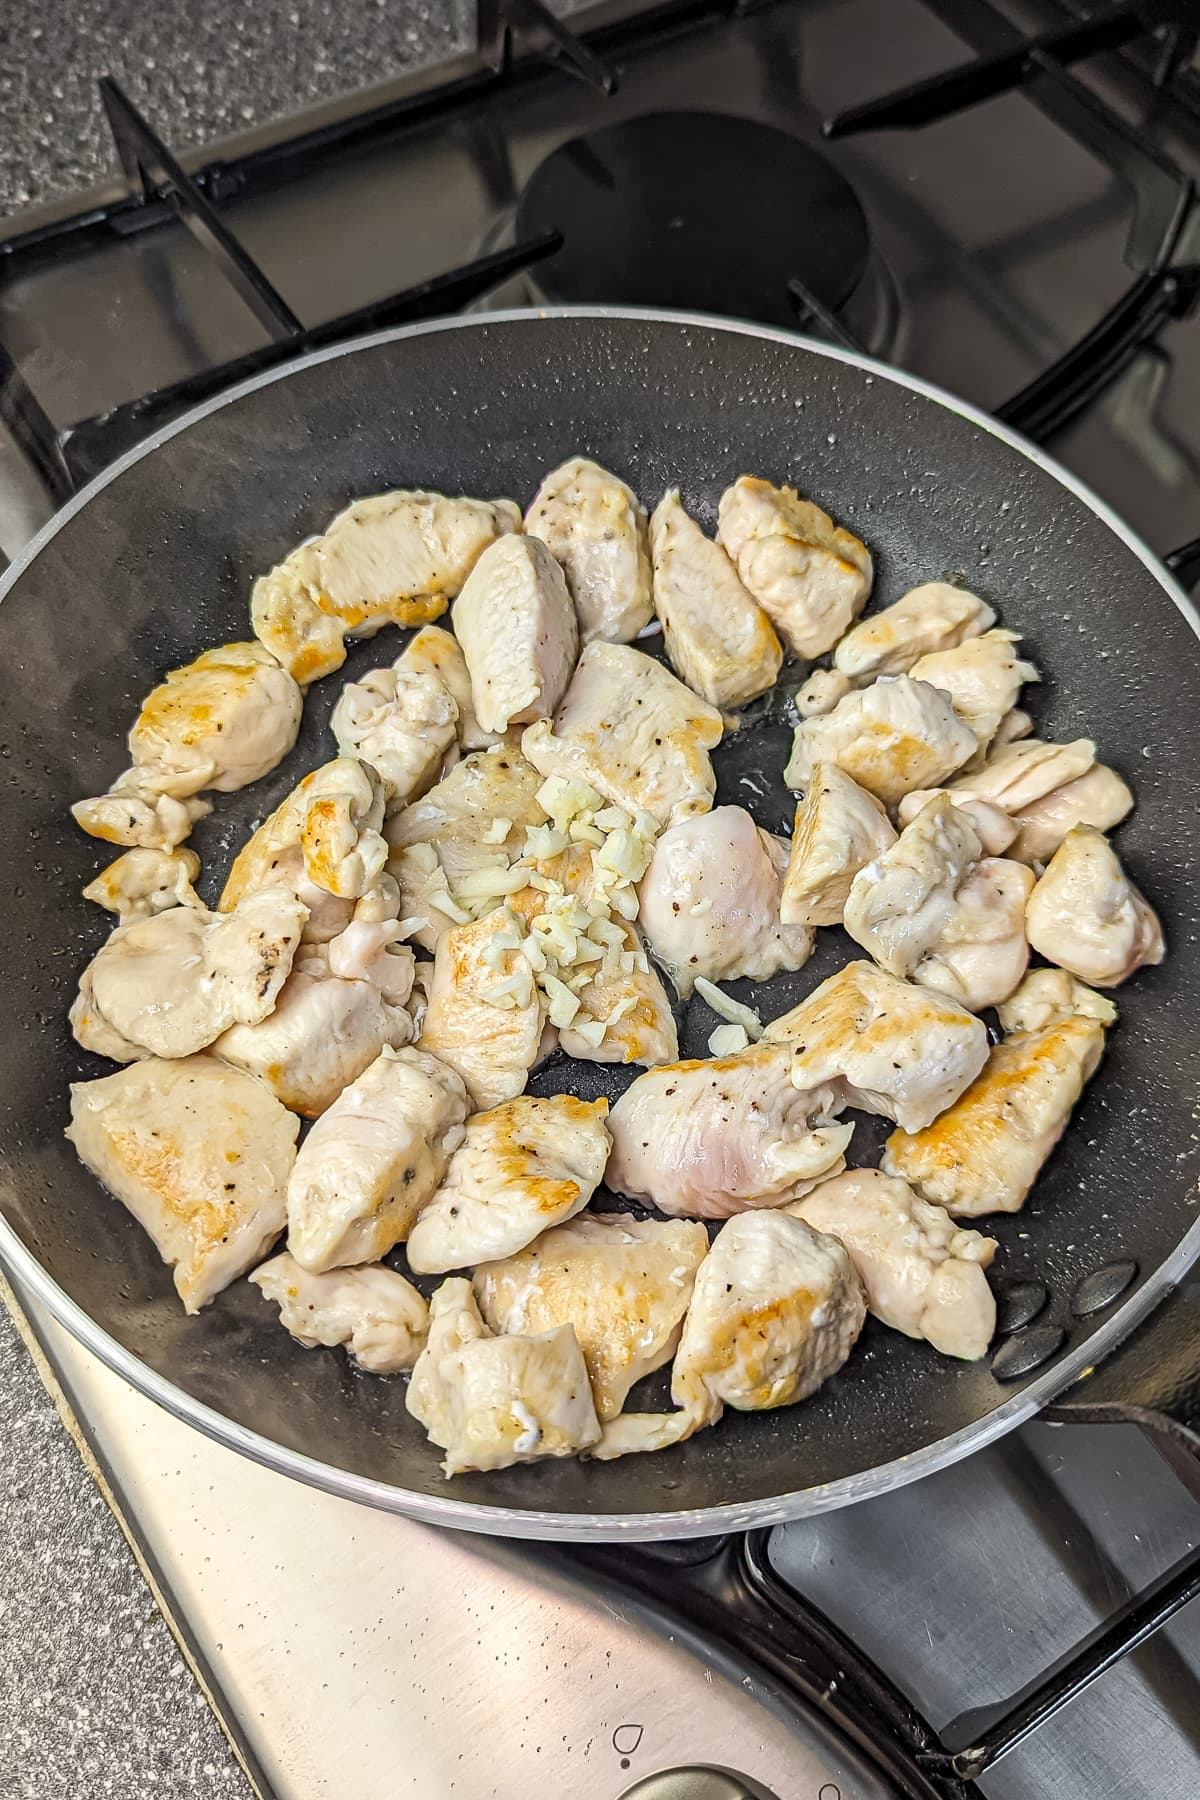 Cooked chicken pieces in a non-stick frying pan with chopped garlic, showcasing the beginning stages of browning.